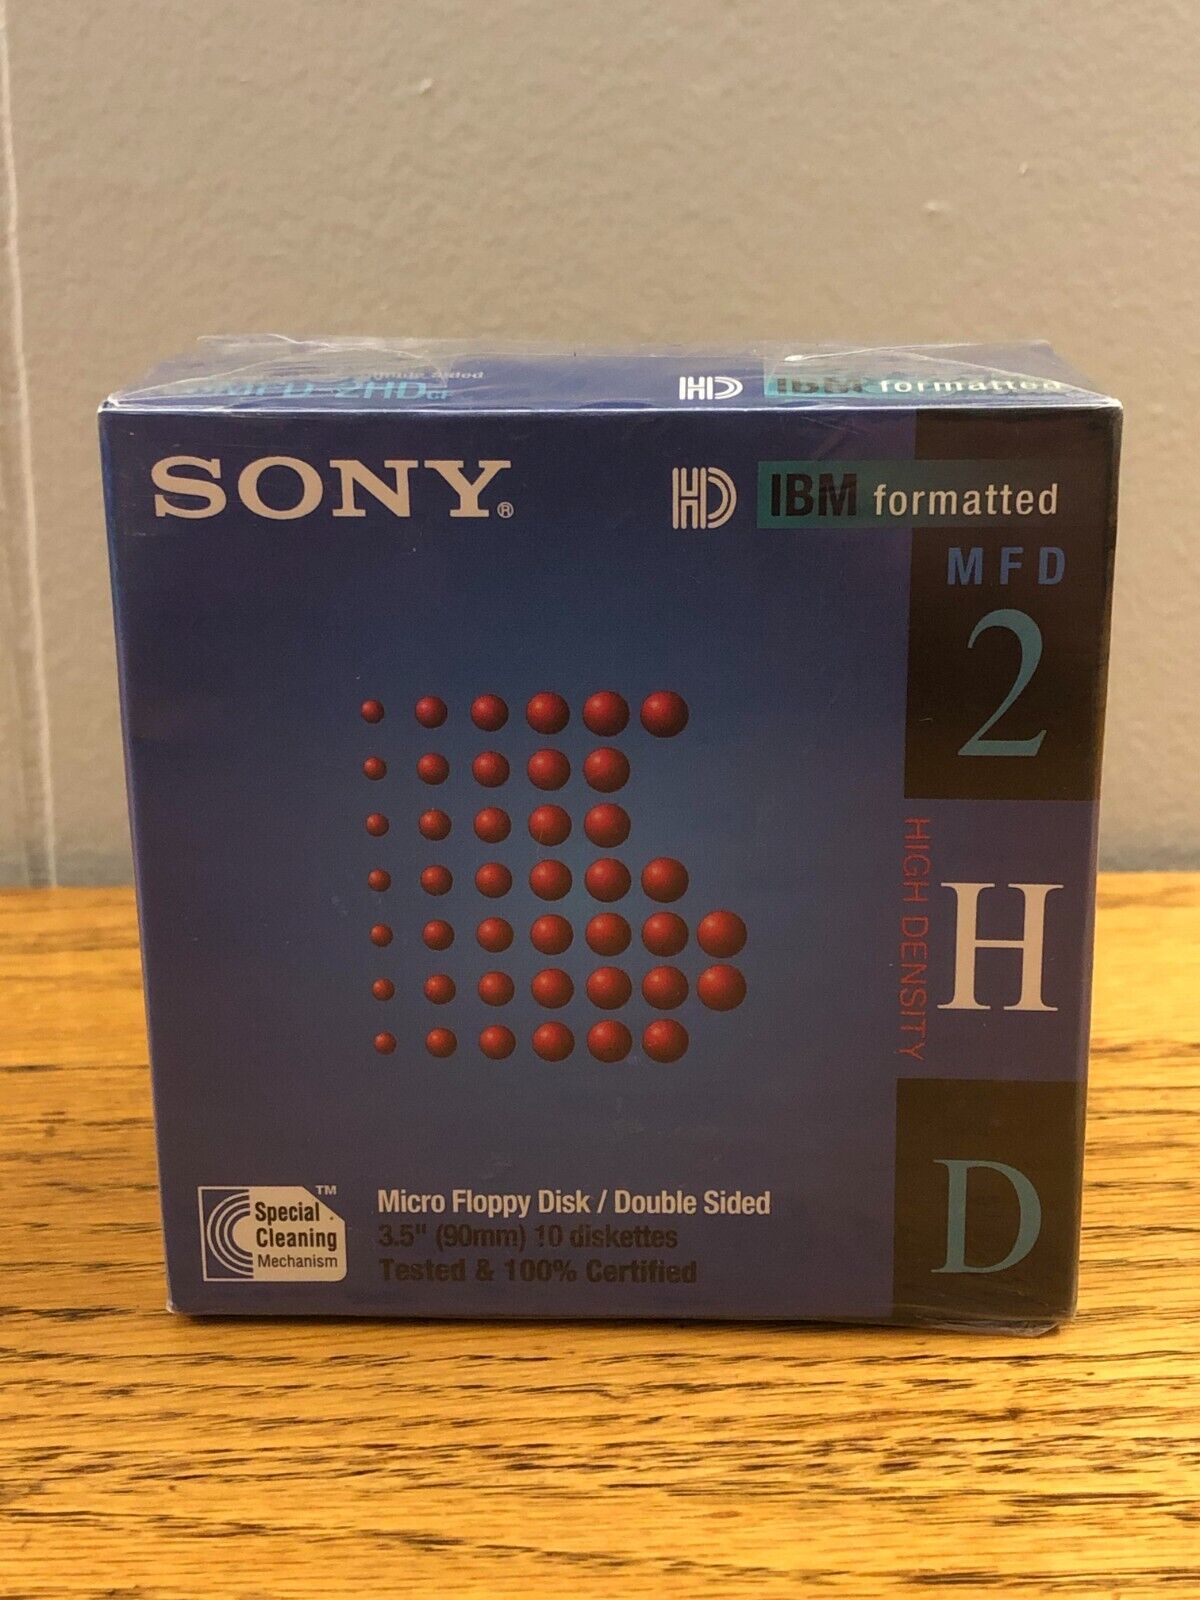 Sony HD IBM Formatted MFD 2 Micro Floppy Disk Double Sided 10 Pack 2HD - NEW